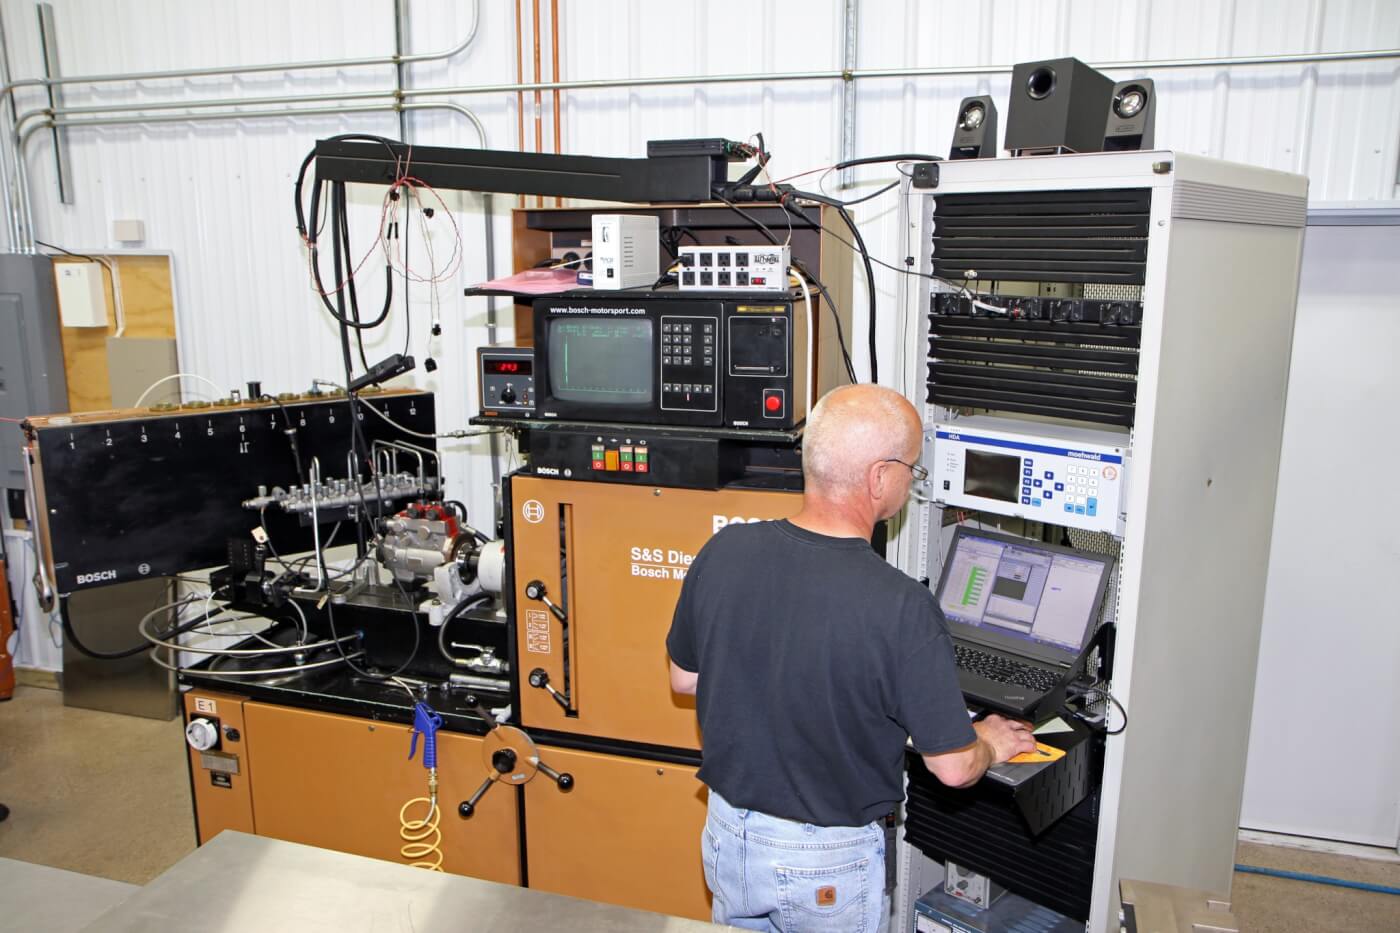 13. The S&S team has a large test machine to measure and verify injector flow and solenoid operation. Each injector within a set is matched to flow within ±0.5% which is a tighter tolerance than OEM standards.